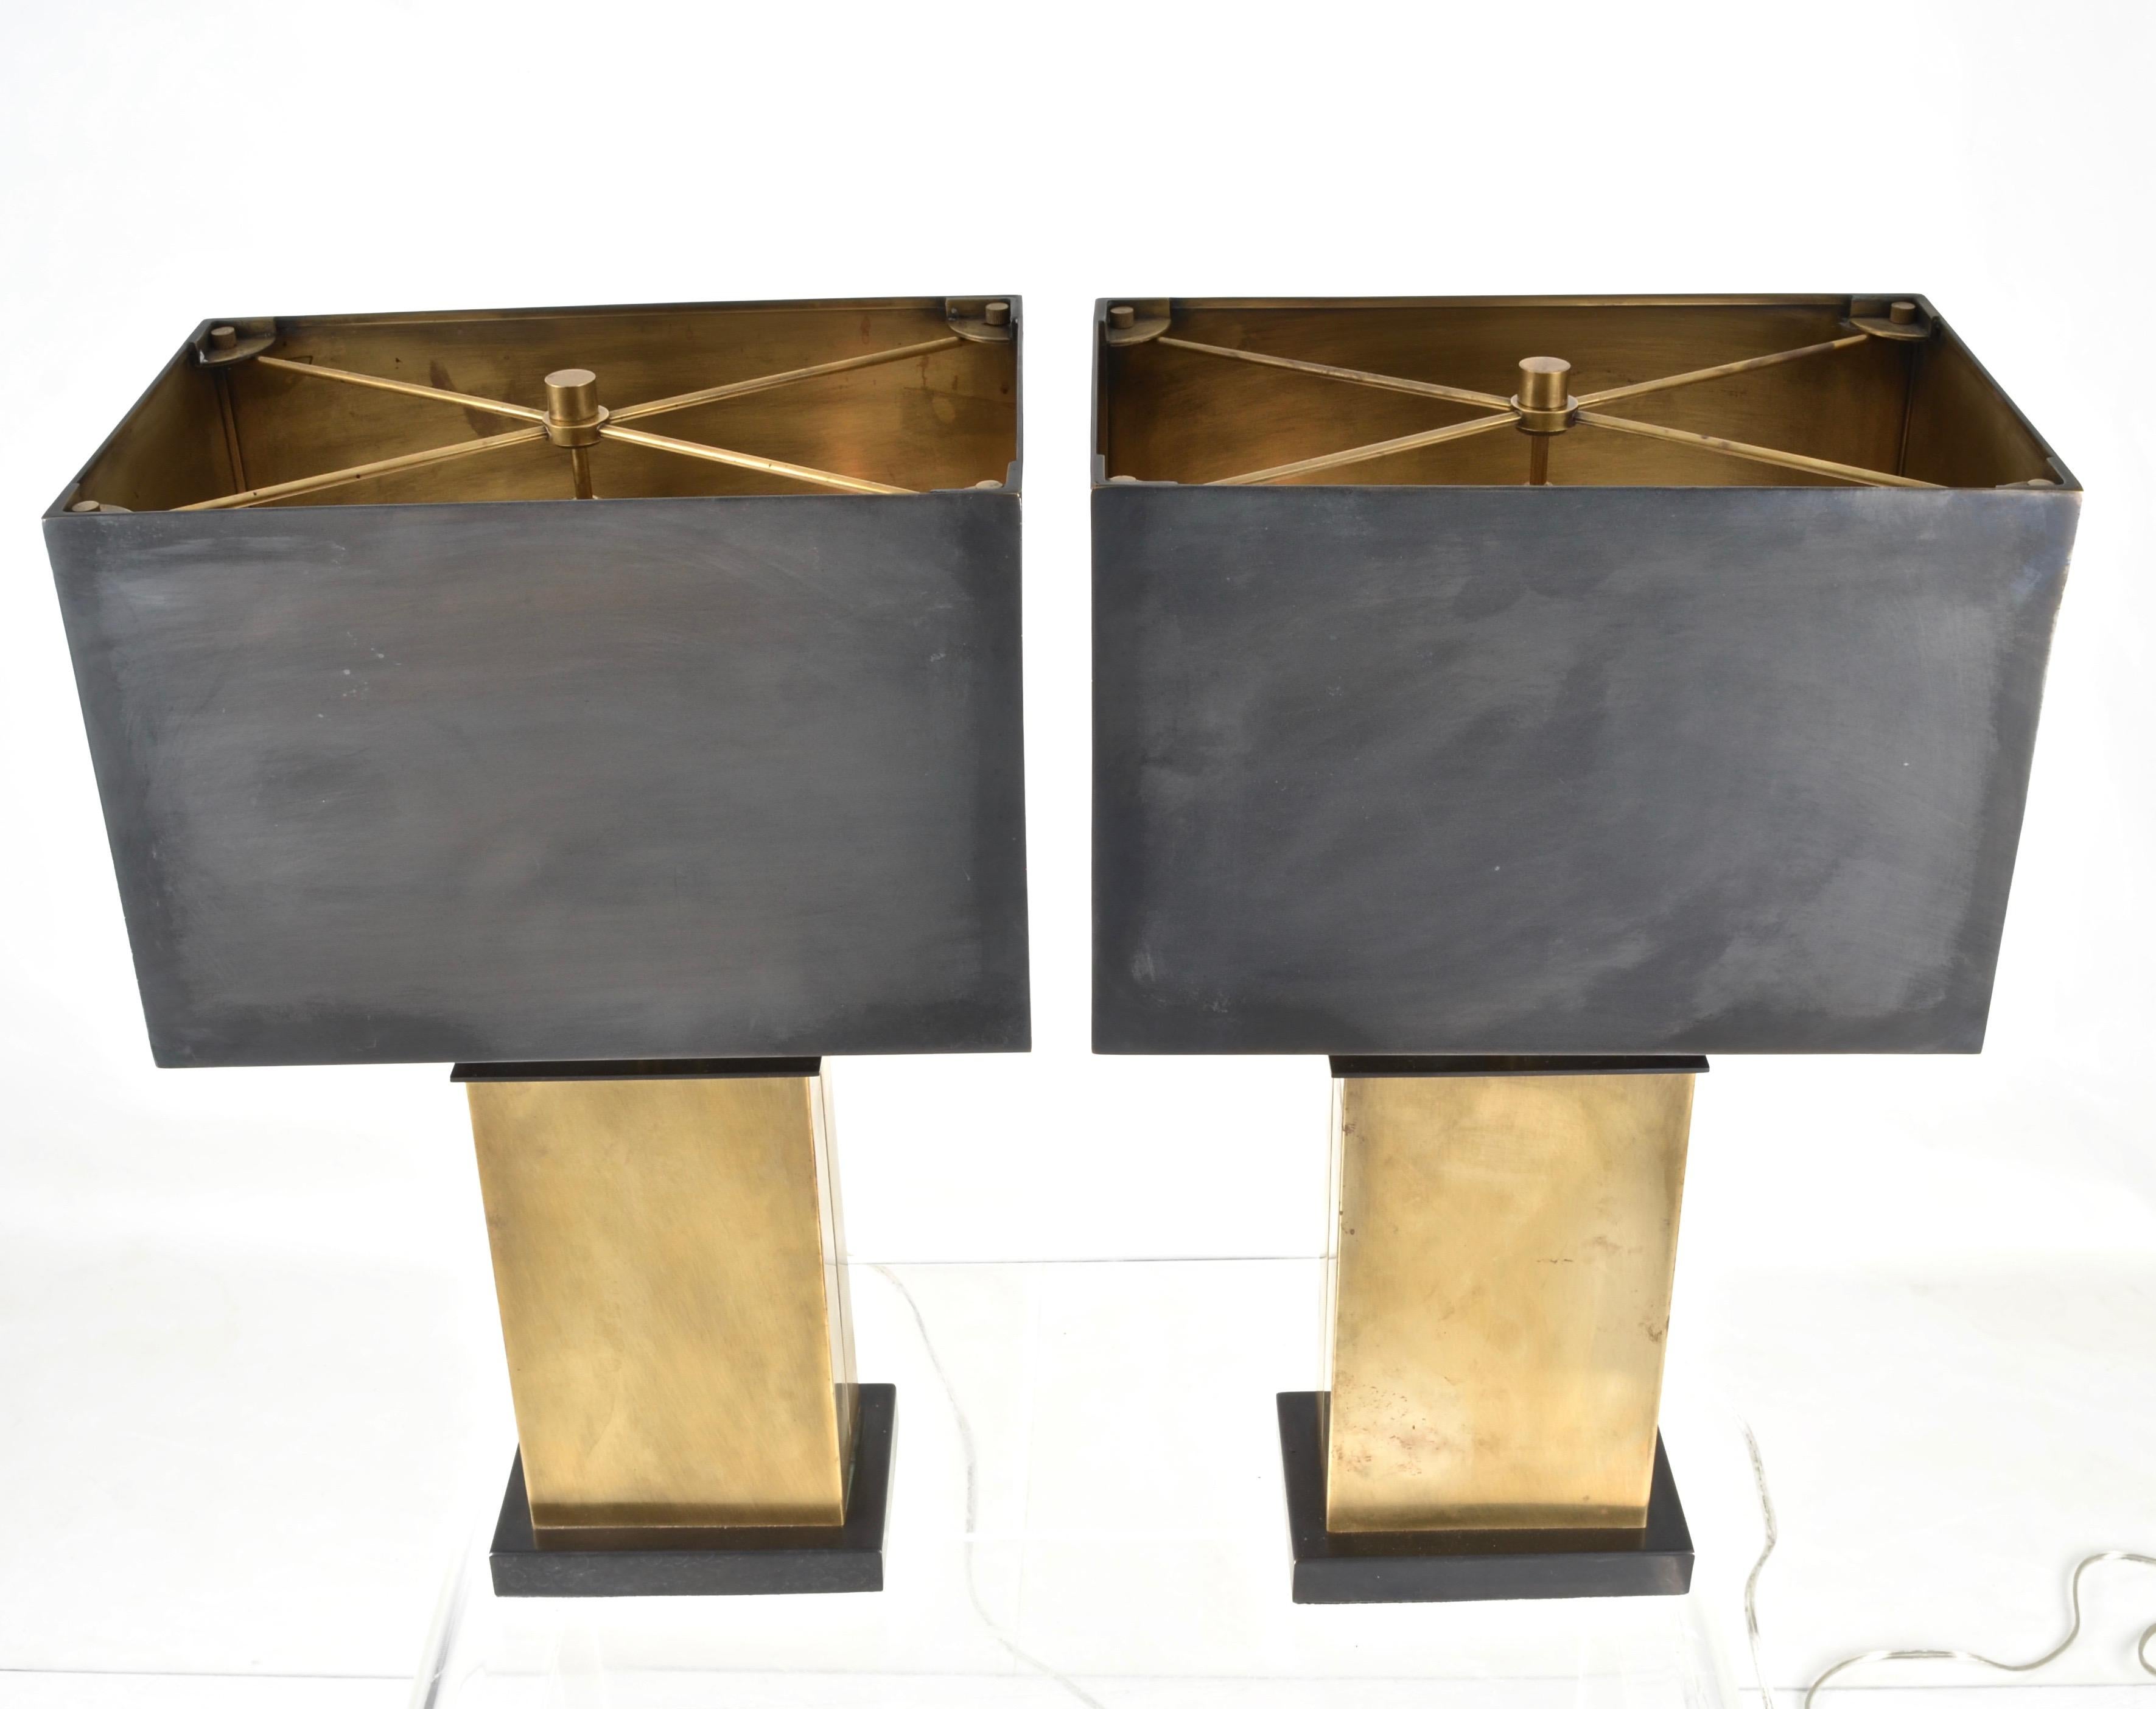 A striking design by noted designer Thomas O'Brien for Visual Comfort & Company Lighting. This pair is in a hand-rubbed antique brass finish with dark bronze finish shades with polished brass interiors. Two socket lamp, each socket takes a 60 watt